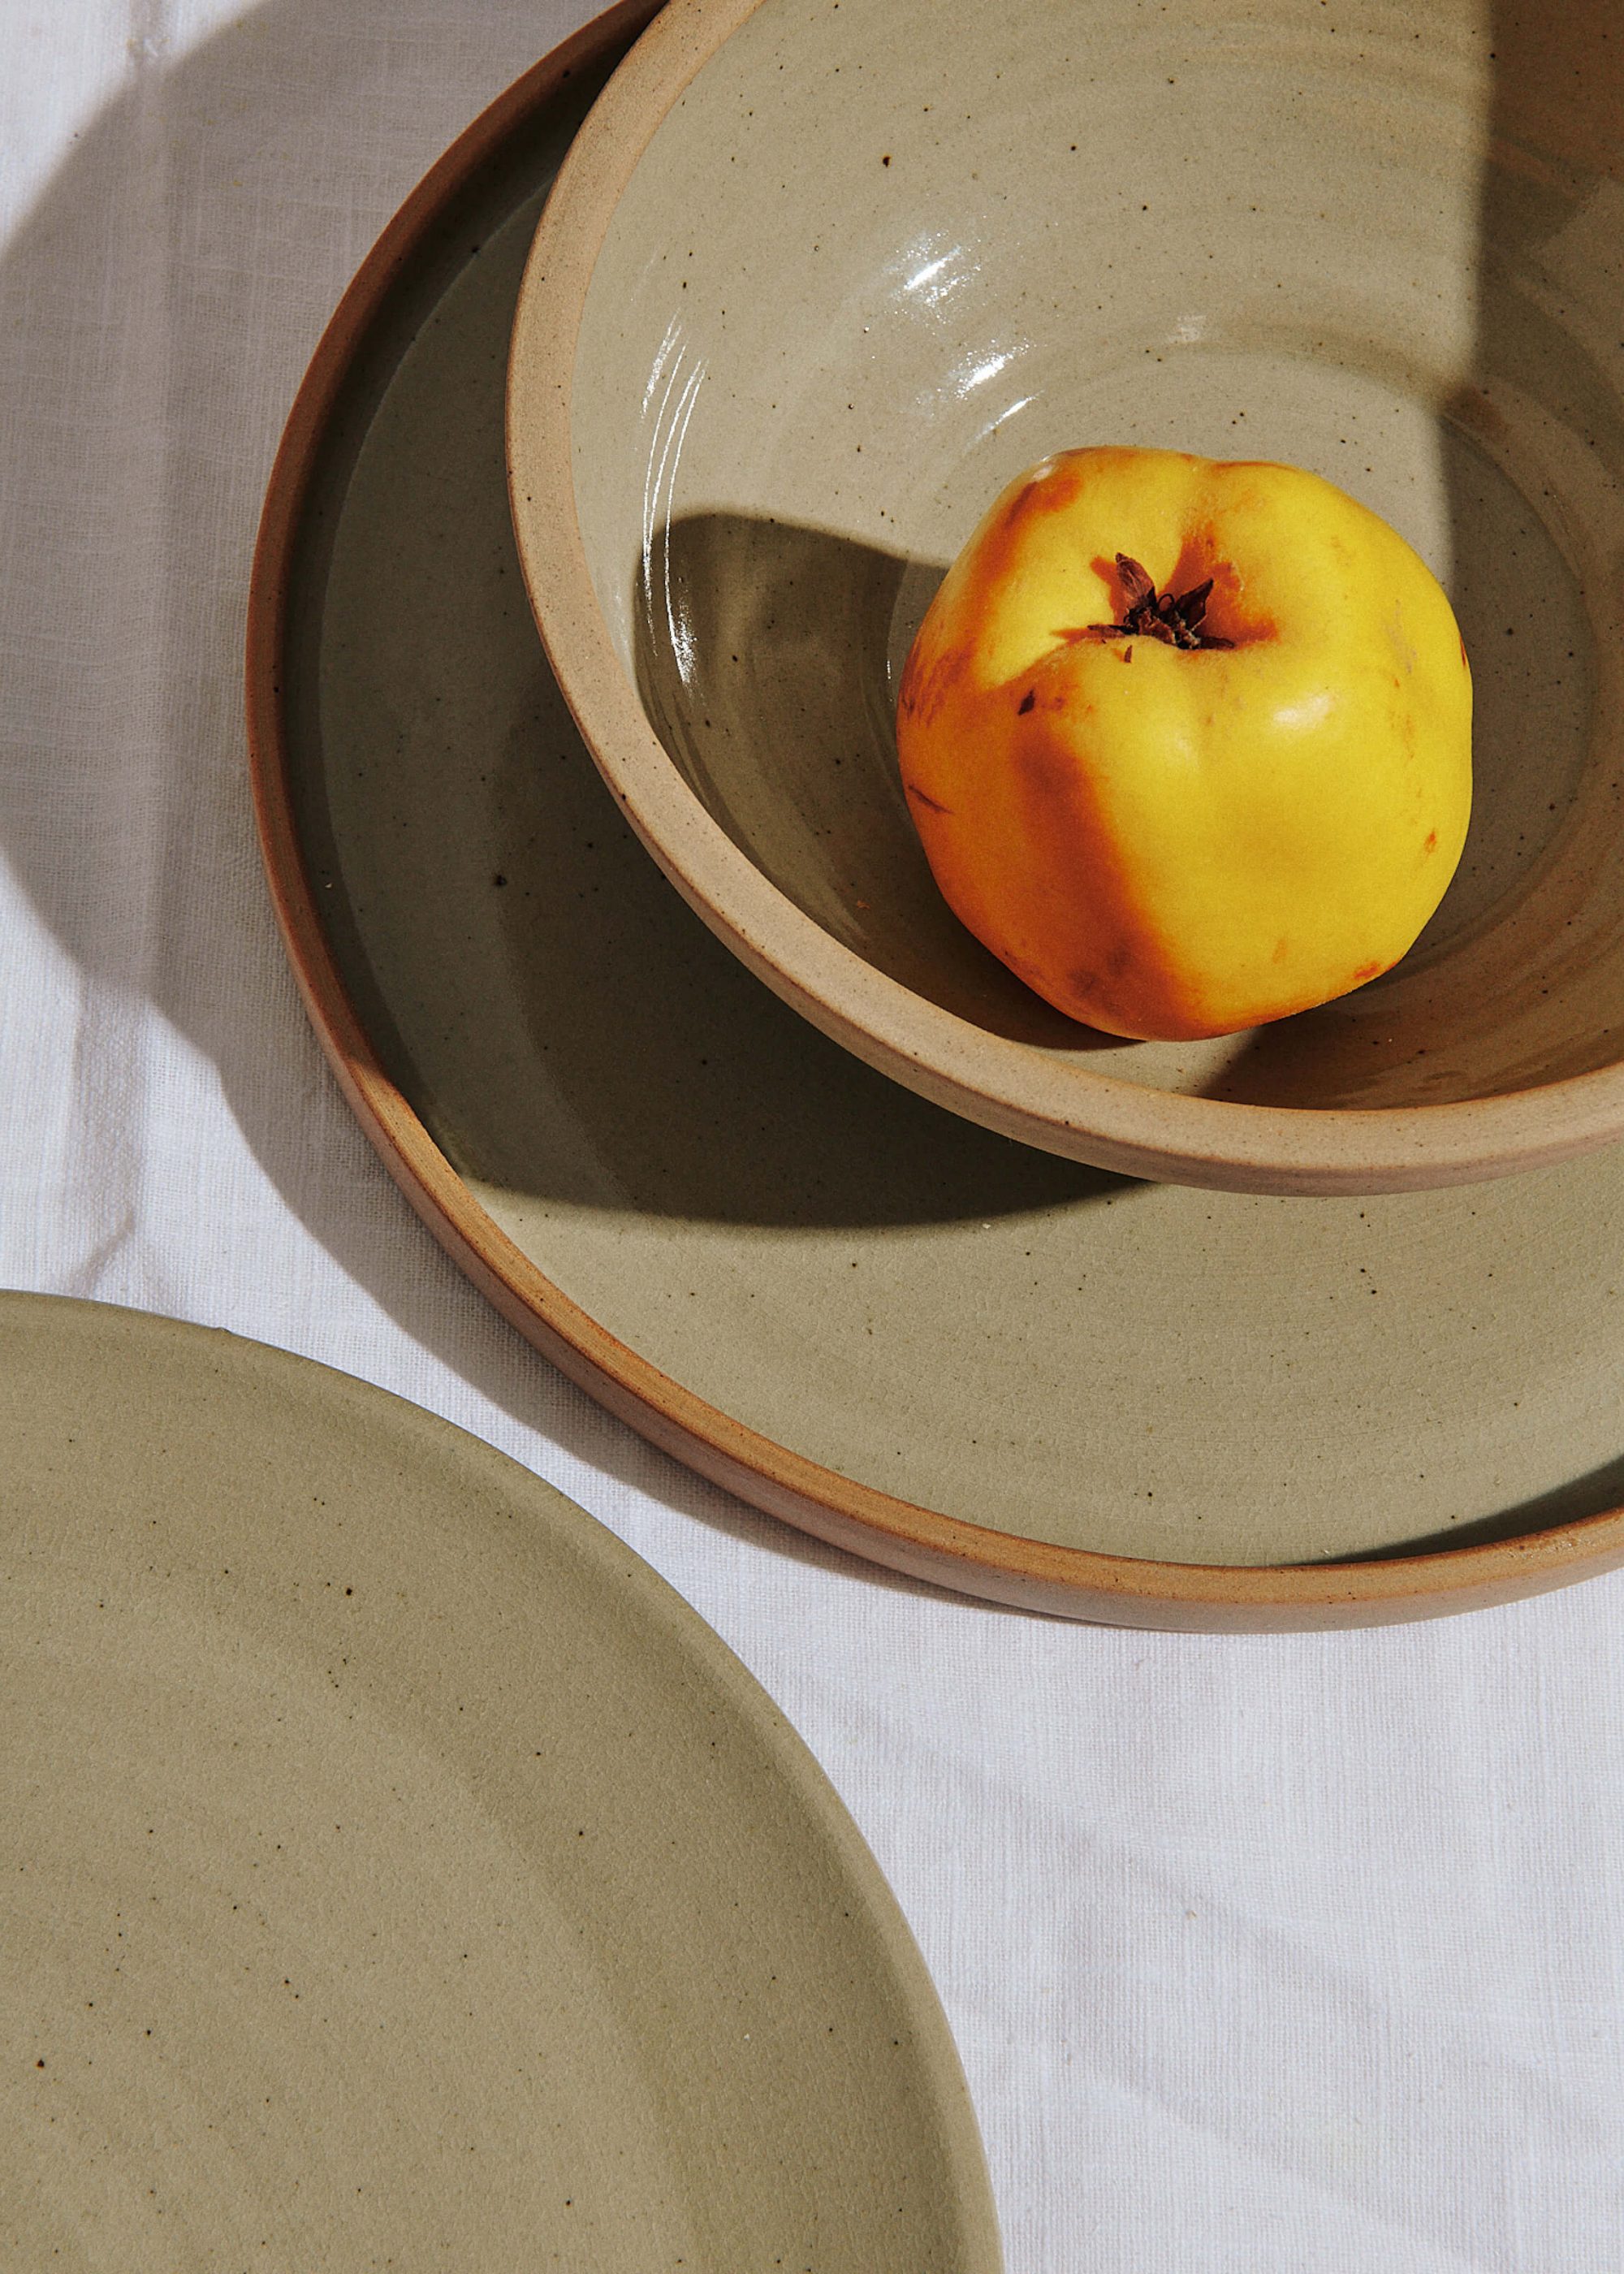 Product image for N° ICSE1 BEUYS Food Bowl